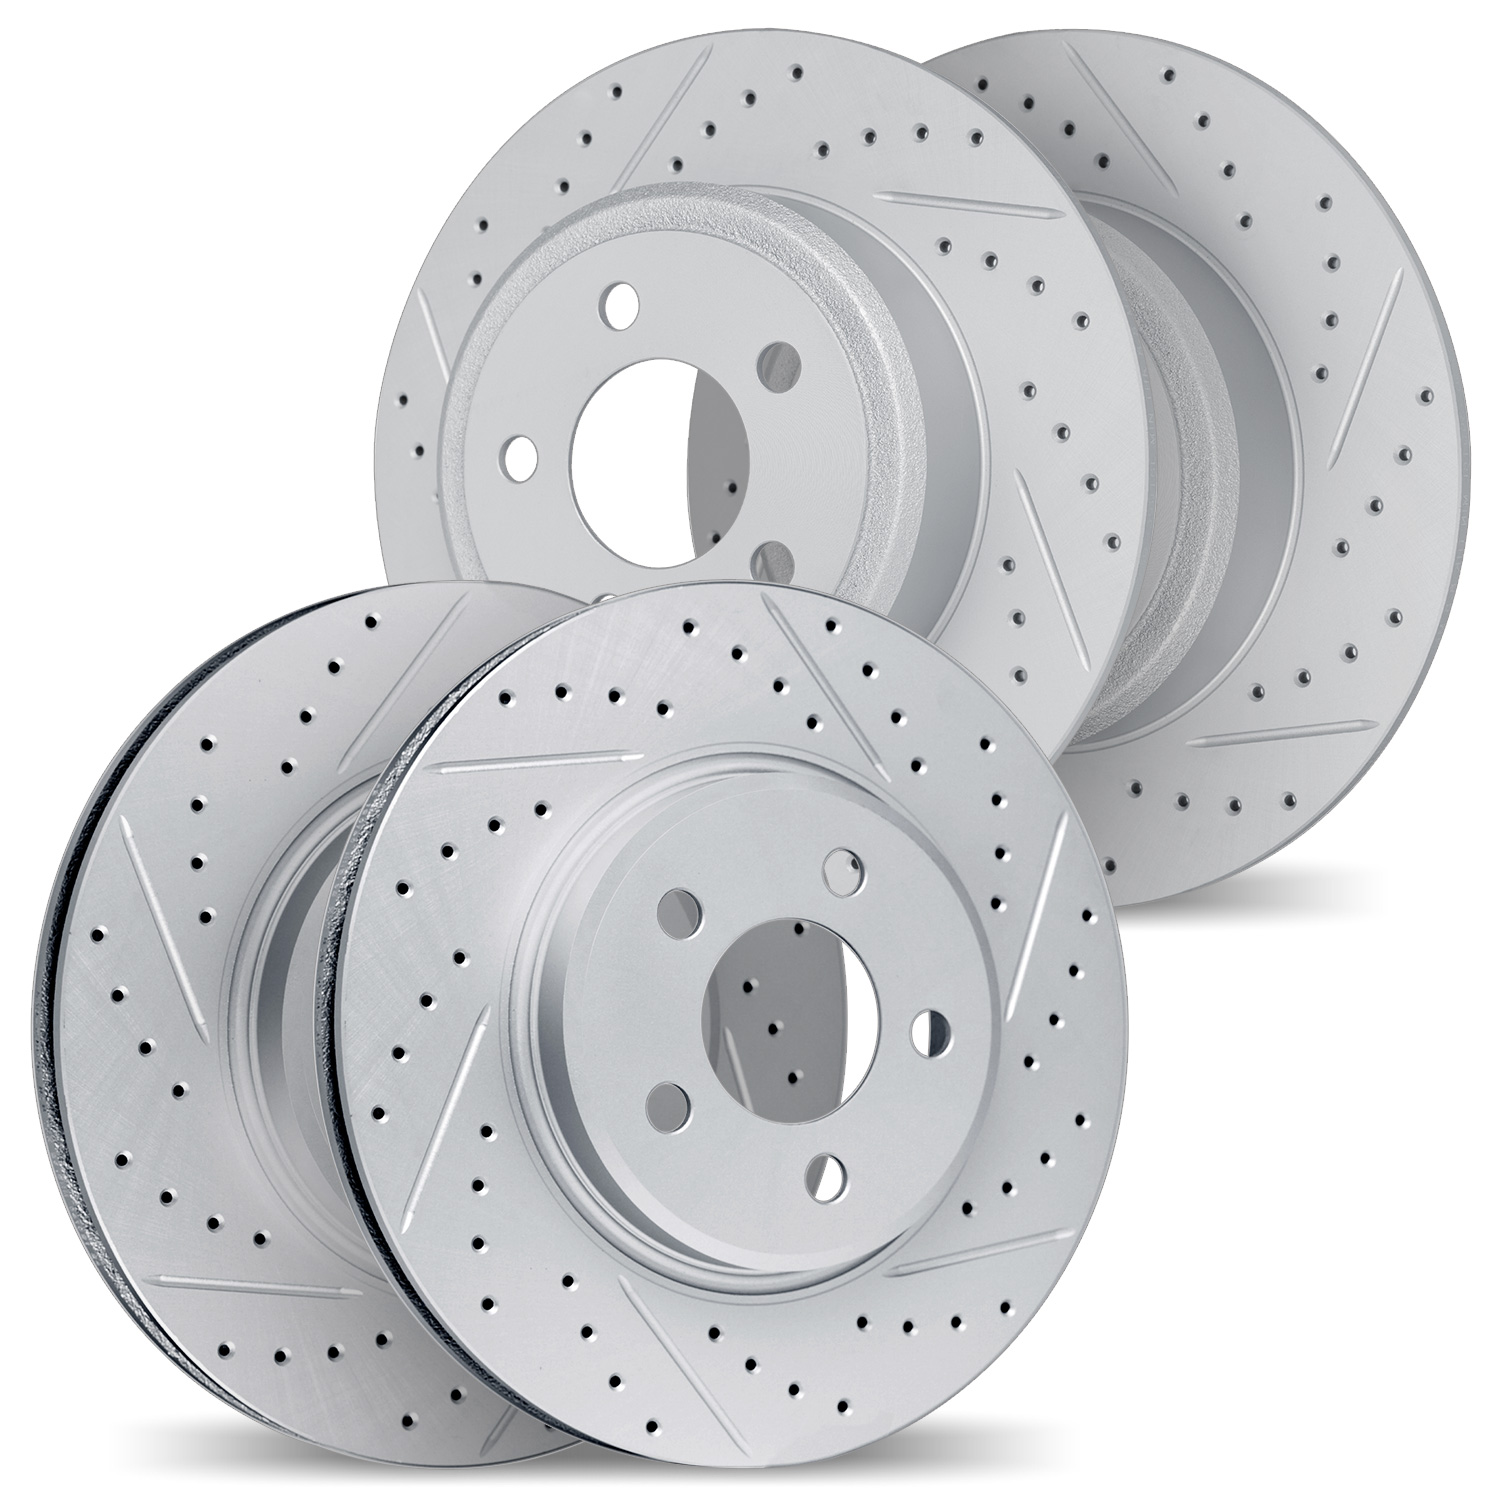 2004-63006 Geoperformance Drilled/Slotted Brake Rotors, 1985-1991 Mercedes-Benz, Position: Front and Rear